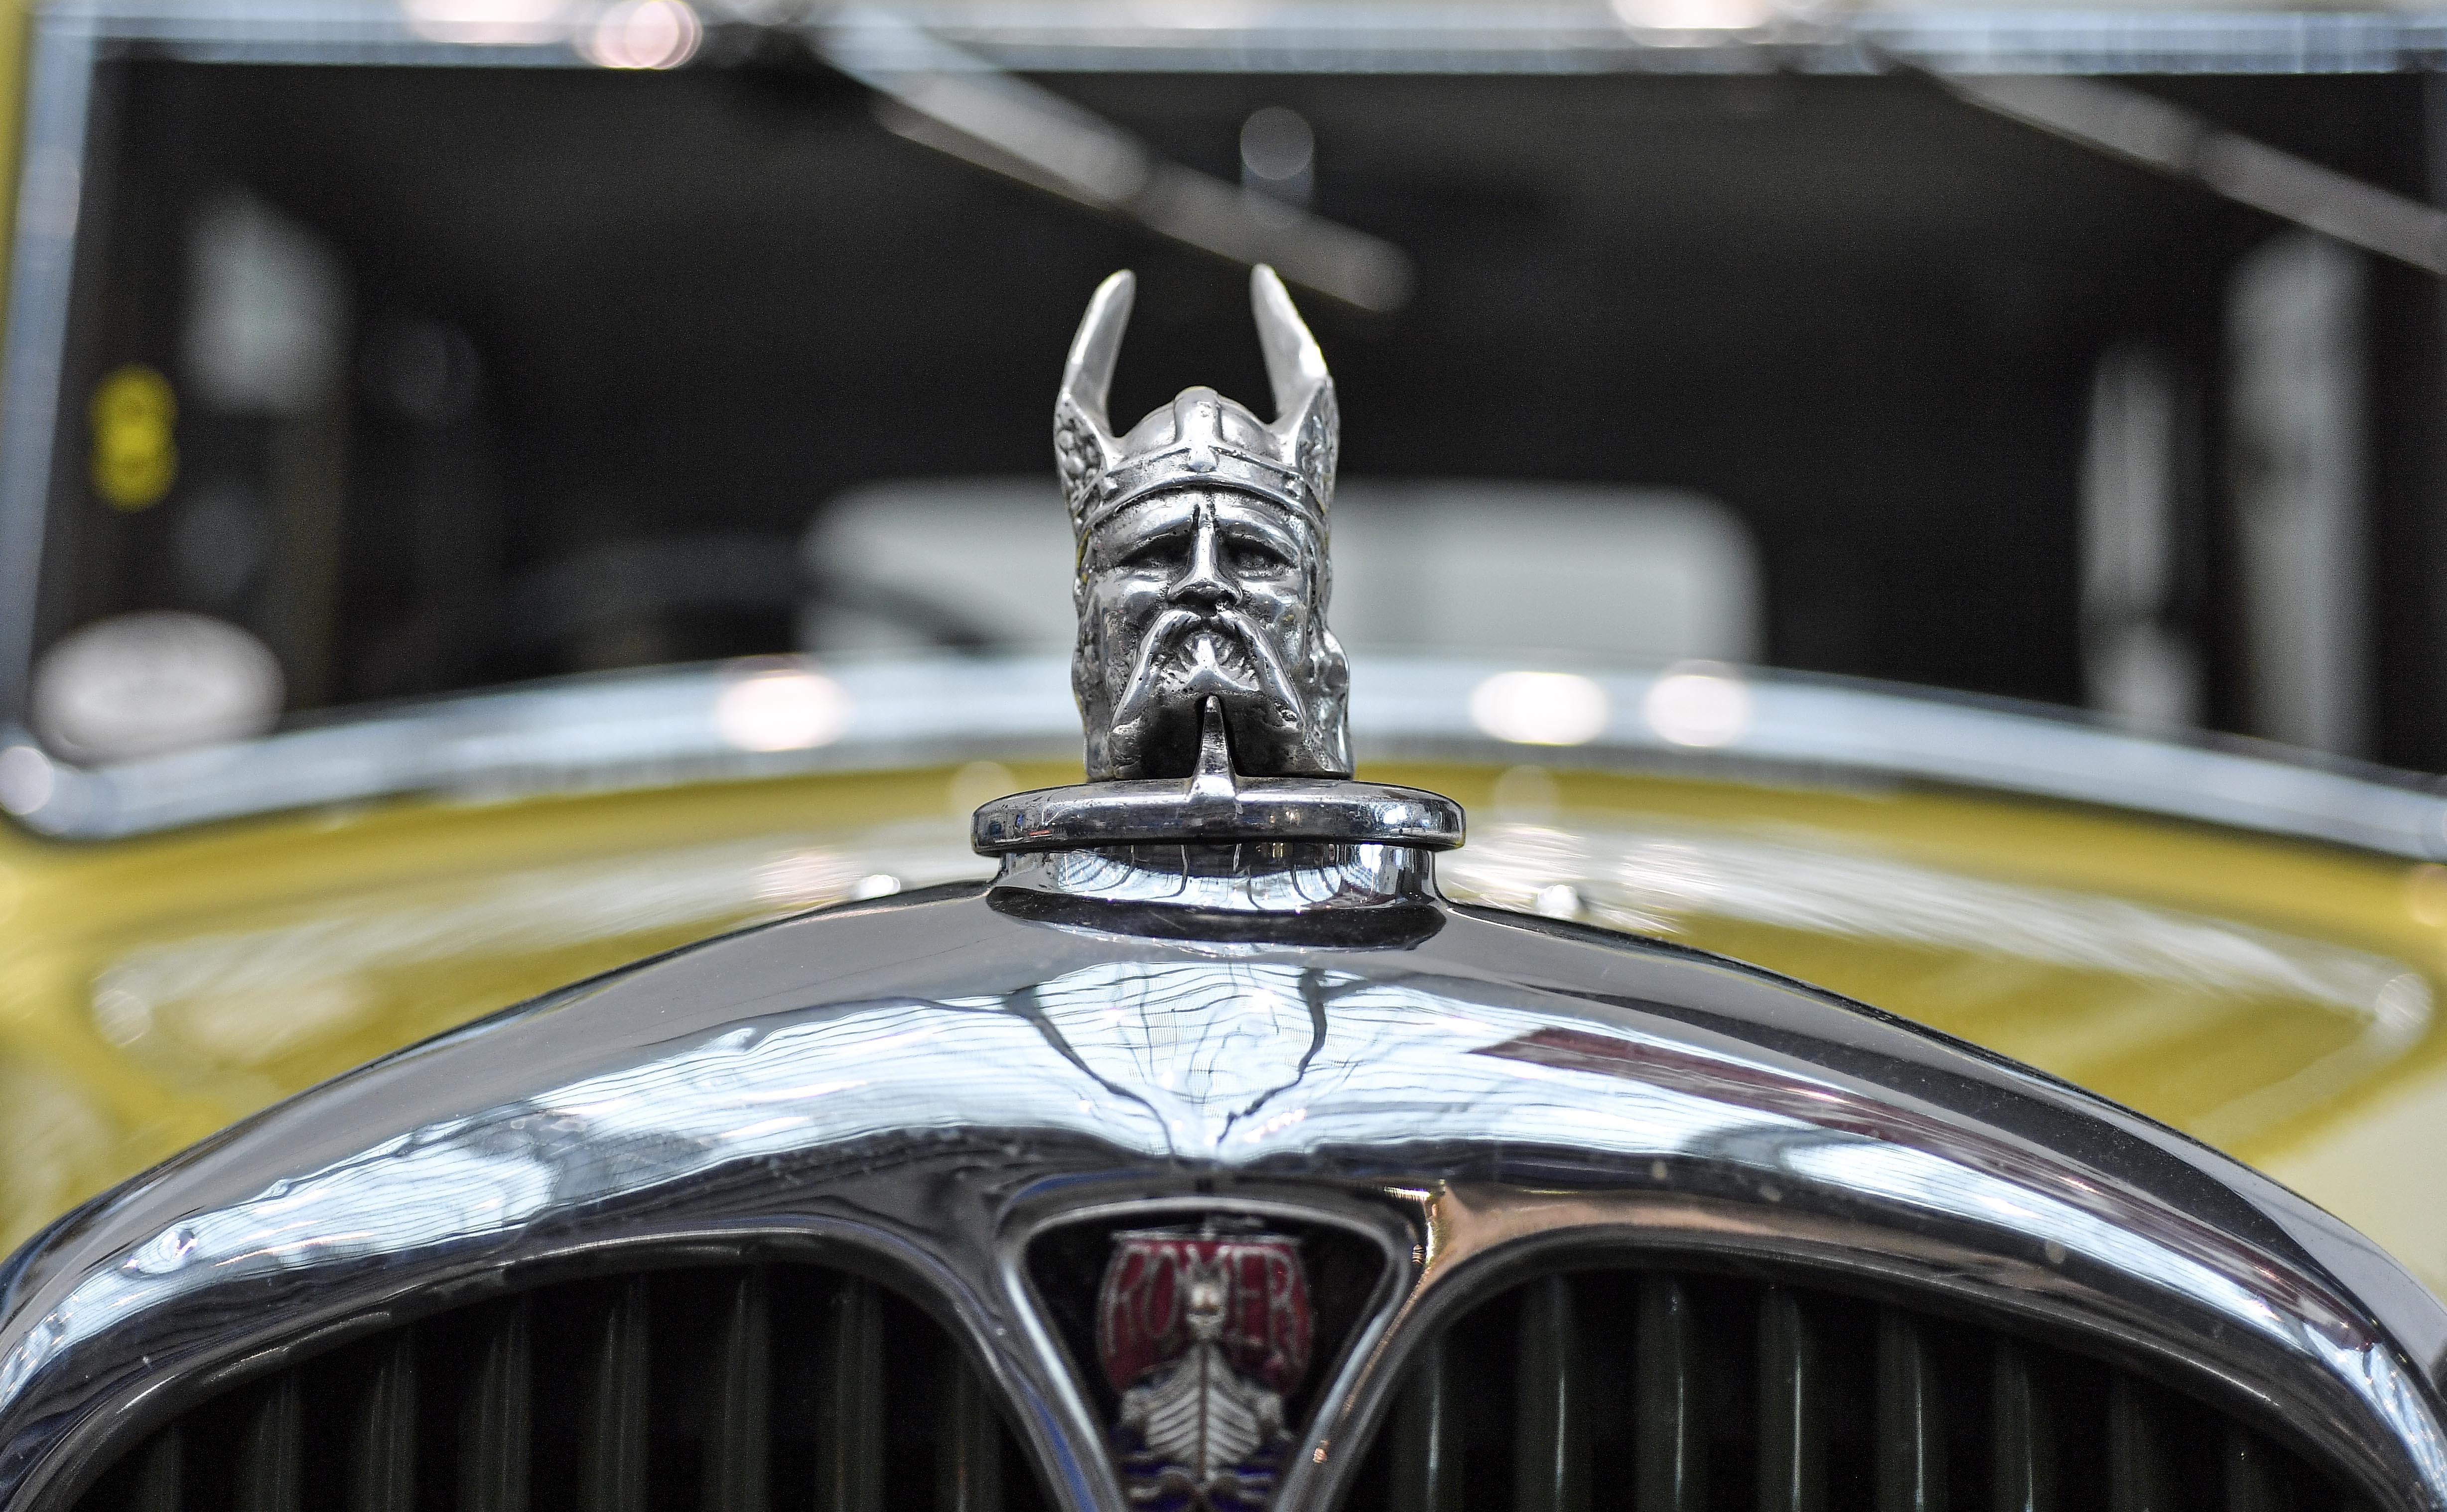 The hood ornament of a Rover P2 HP-14 vintage car from 1936 is seen at the World Show for Vintage, Classic and Prestige Automobiles Techno-Classica in Essen, Germany, Friday, April 12, 2019. (AP Photo/Martin Meissner)